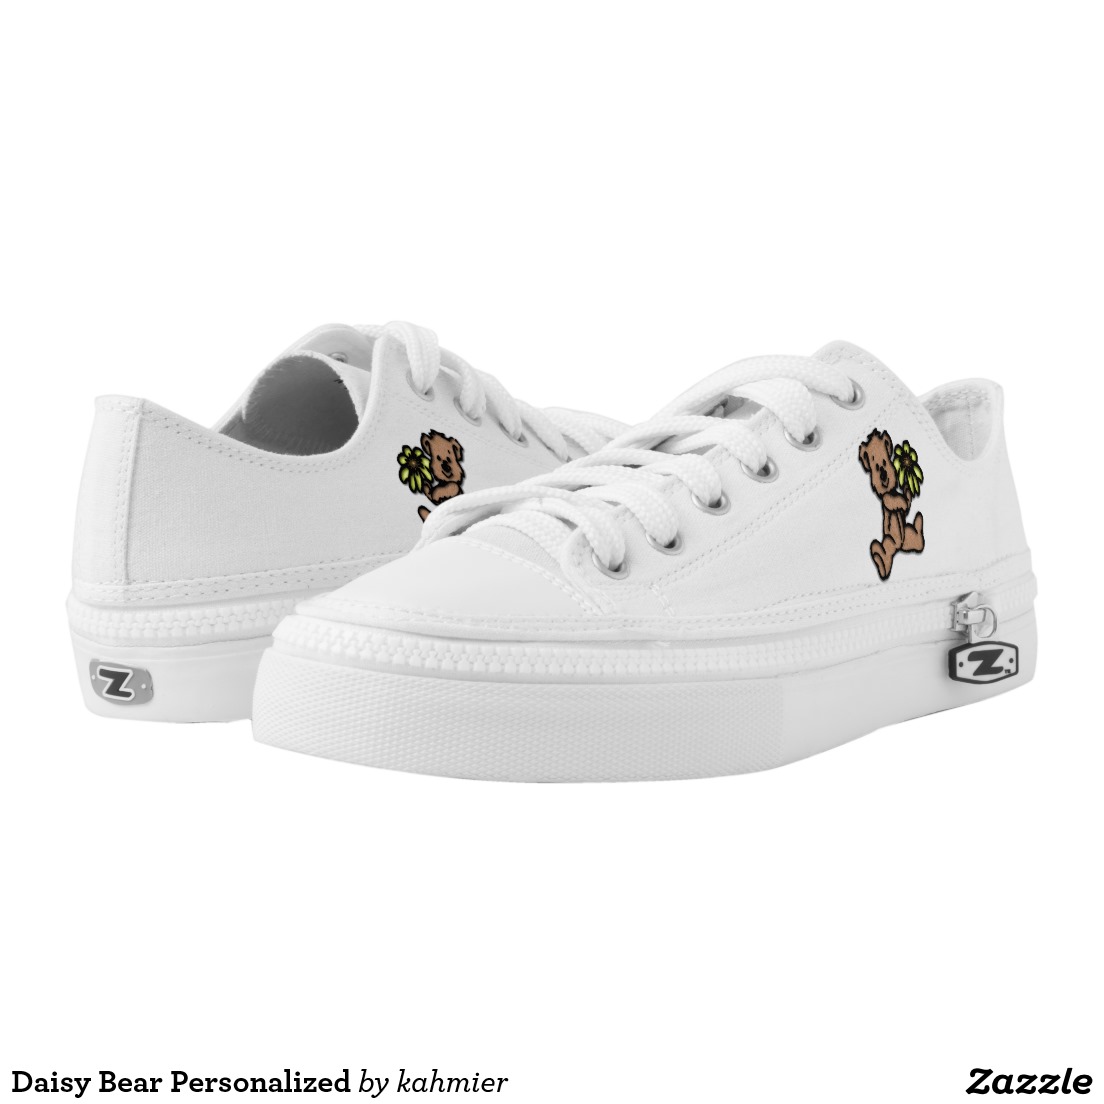 Daisy Bear Personalized Low-Top Sneakers